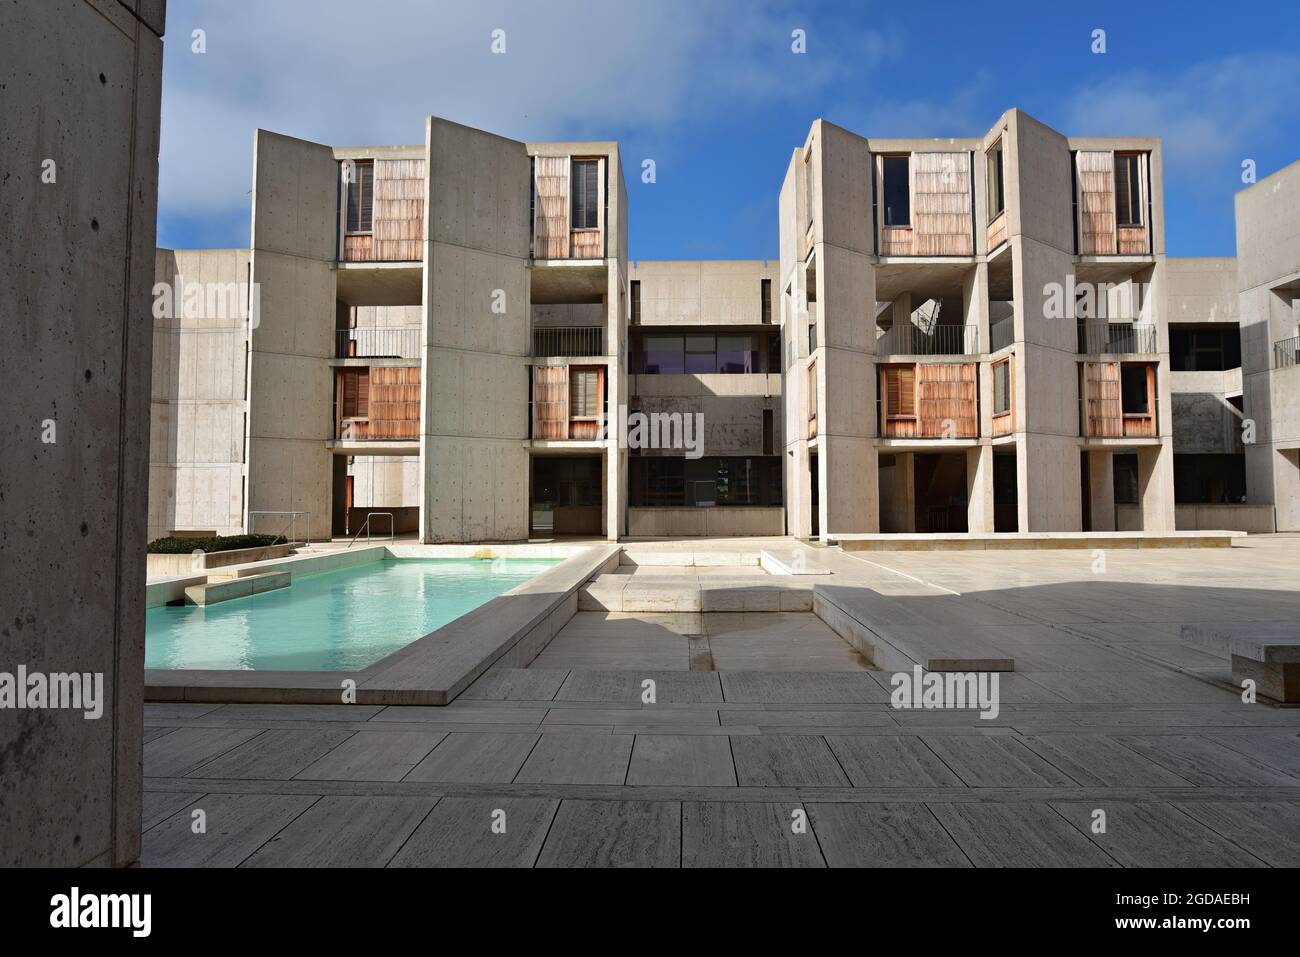 Landscape with scenic pool view of symmetric building masses at Salk Institute for Biological Studies in La Jolla San Diego California Stock Photo